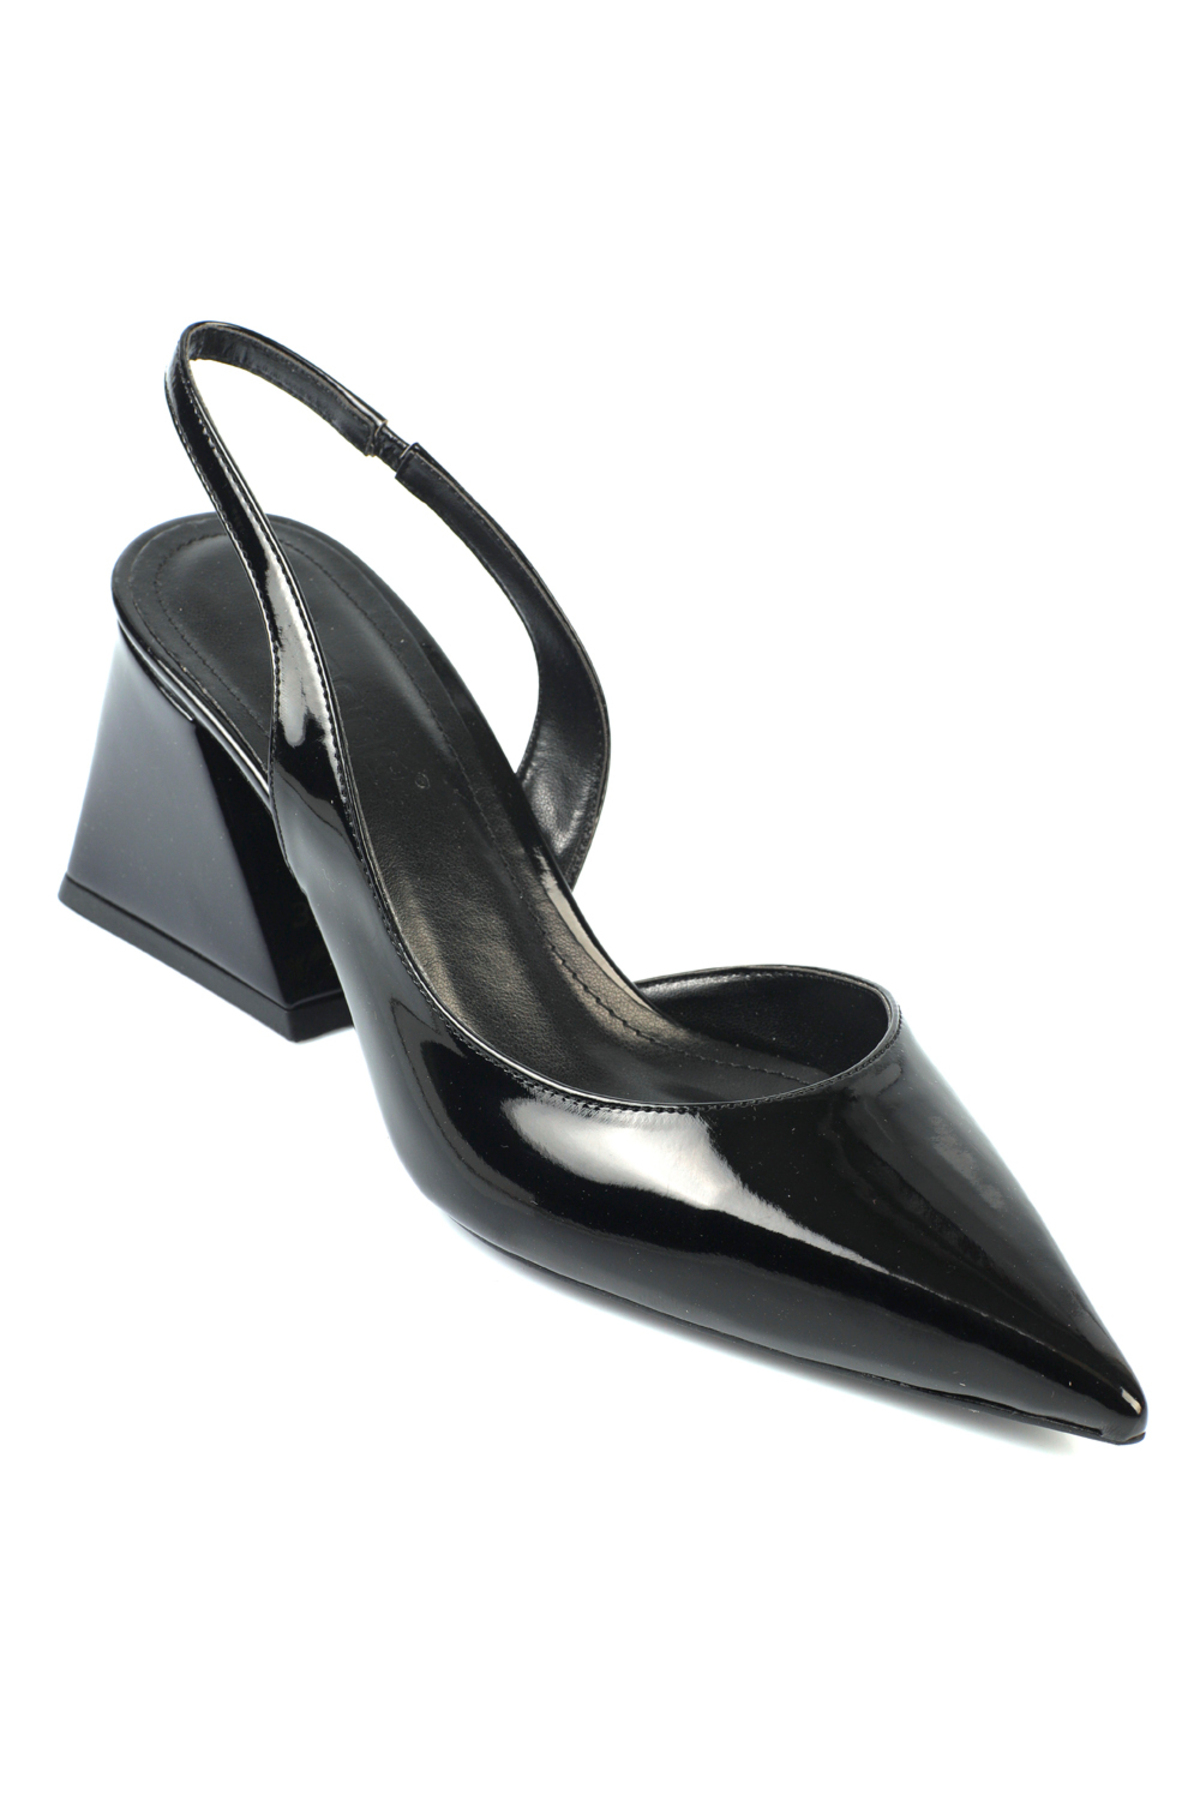 Levně Capone Outfitters Women's Open Back Pointed Toe Mid Heel Patent Leather Shoes